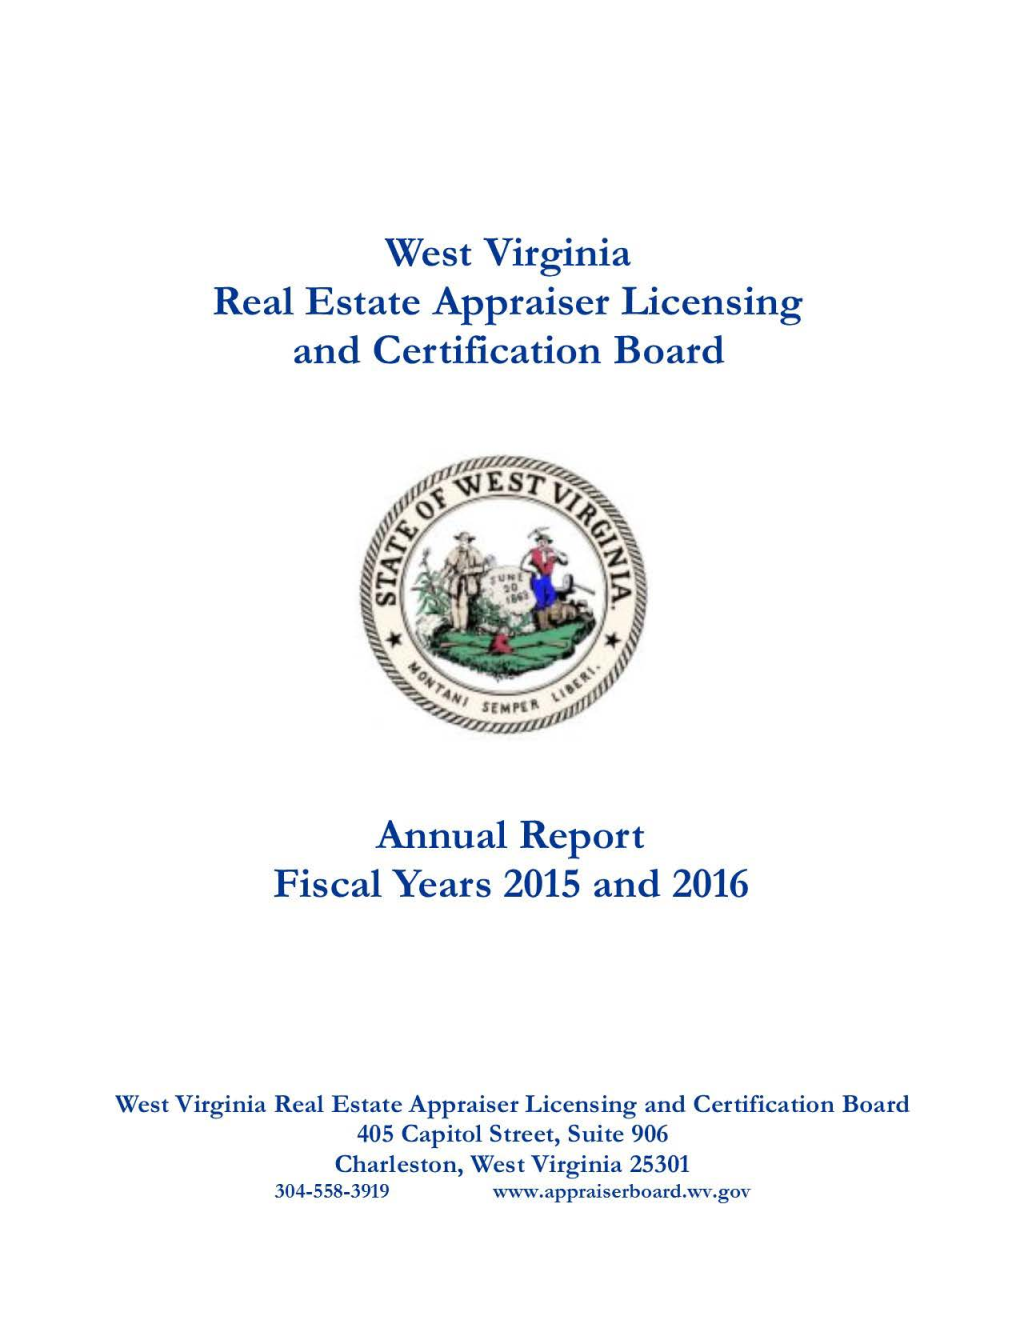 West Virginia Real Estate Appraiser Licensing and Certification Board